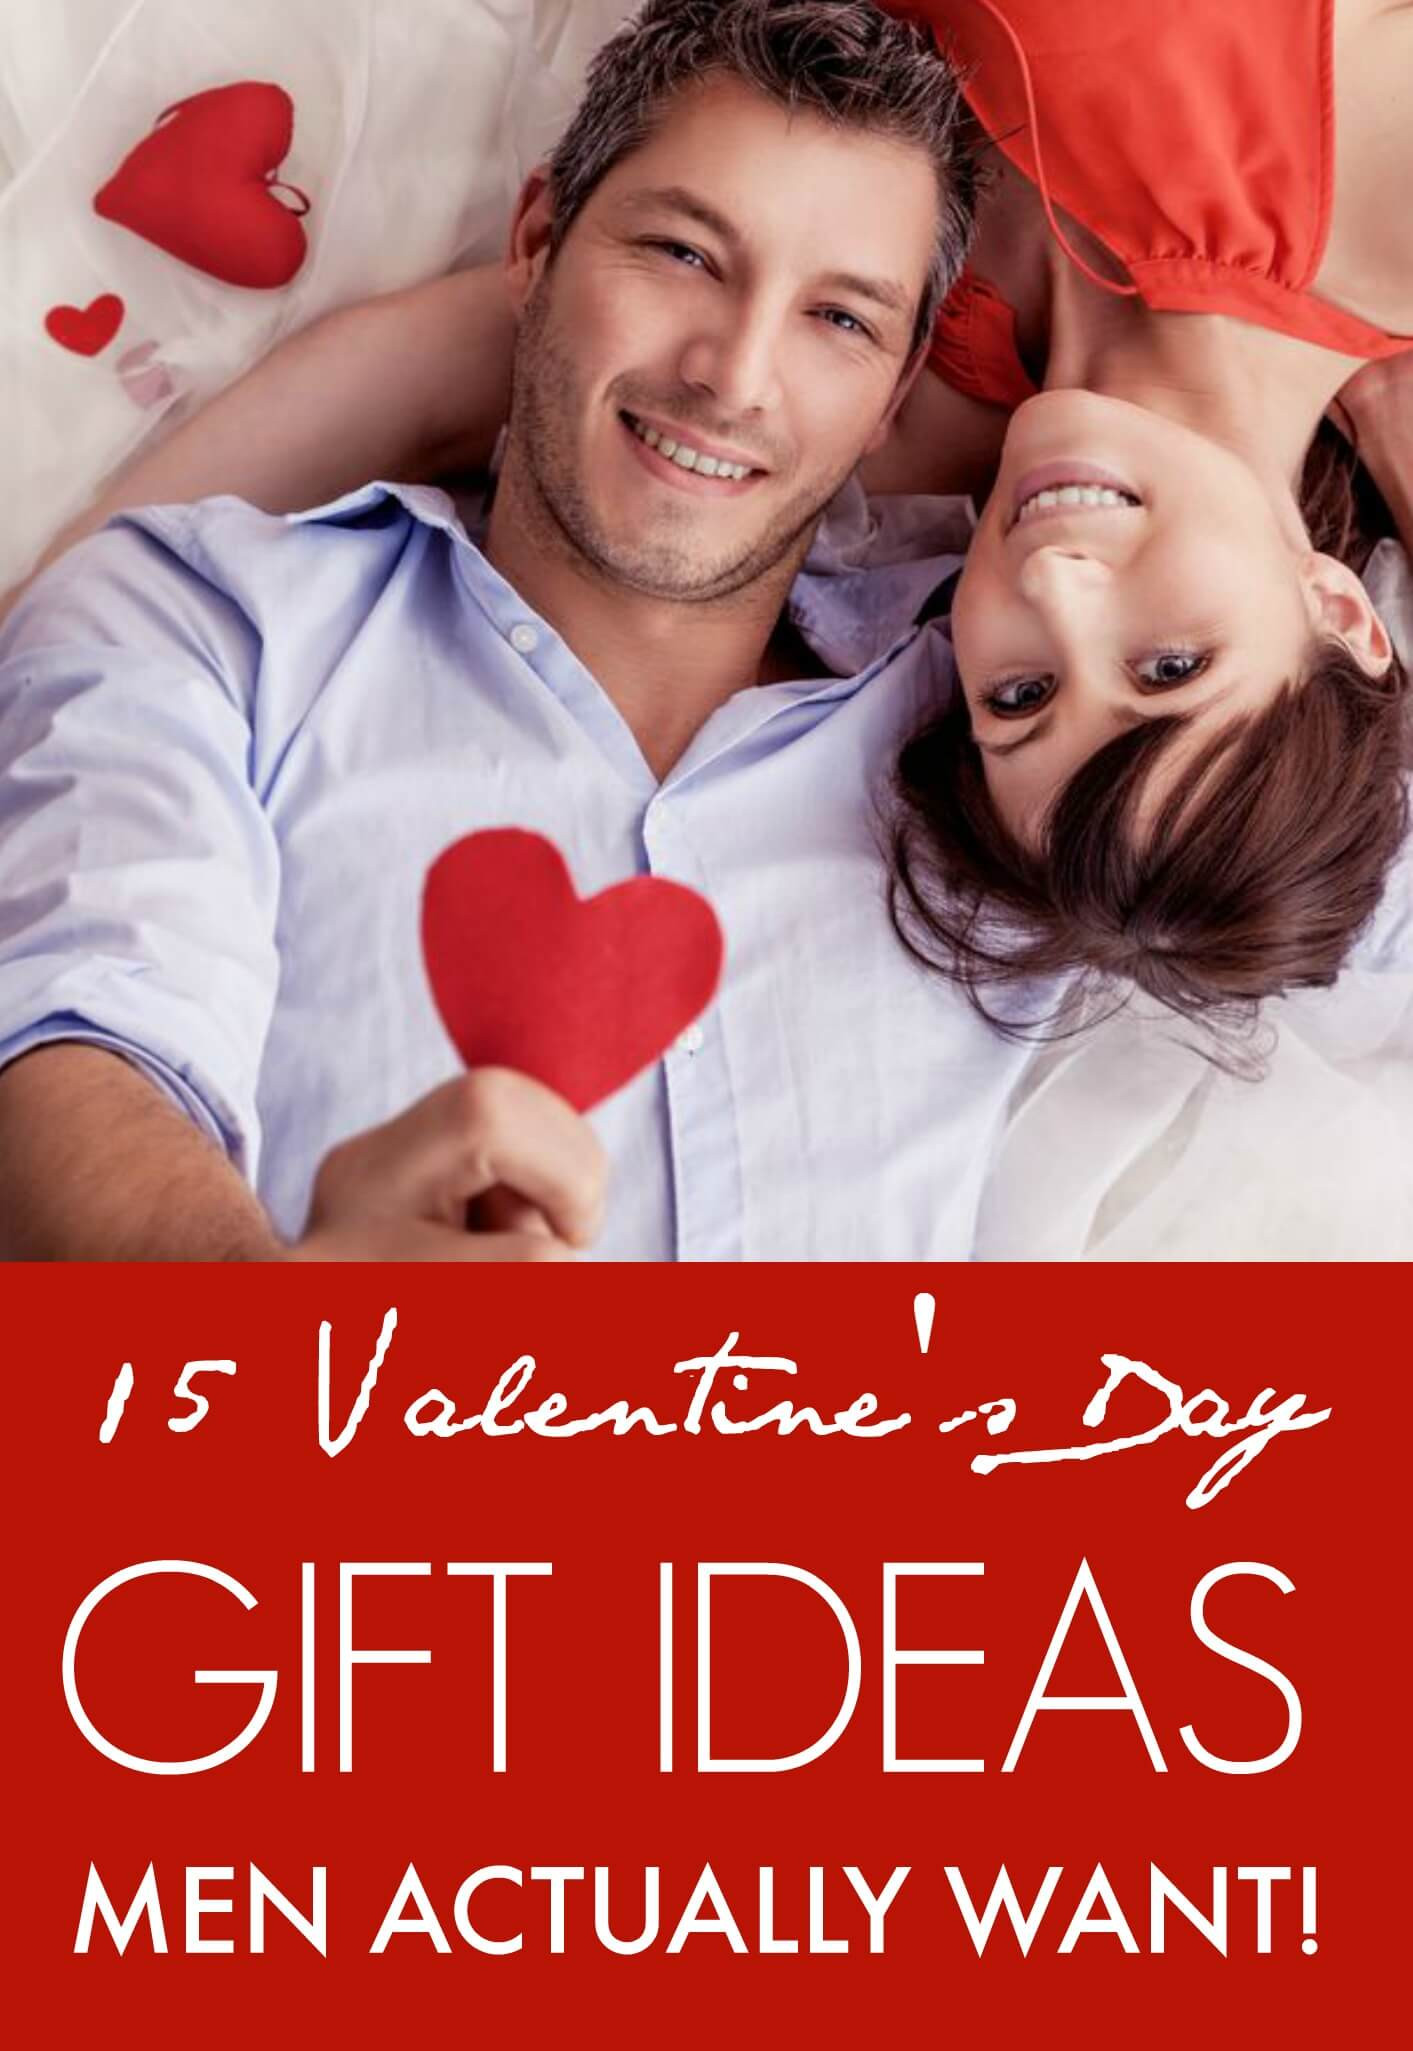 Valentines Day Male Gift Ideas
 15 Valentine’s Day Gift ideas Men Actually Want